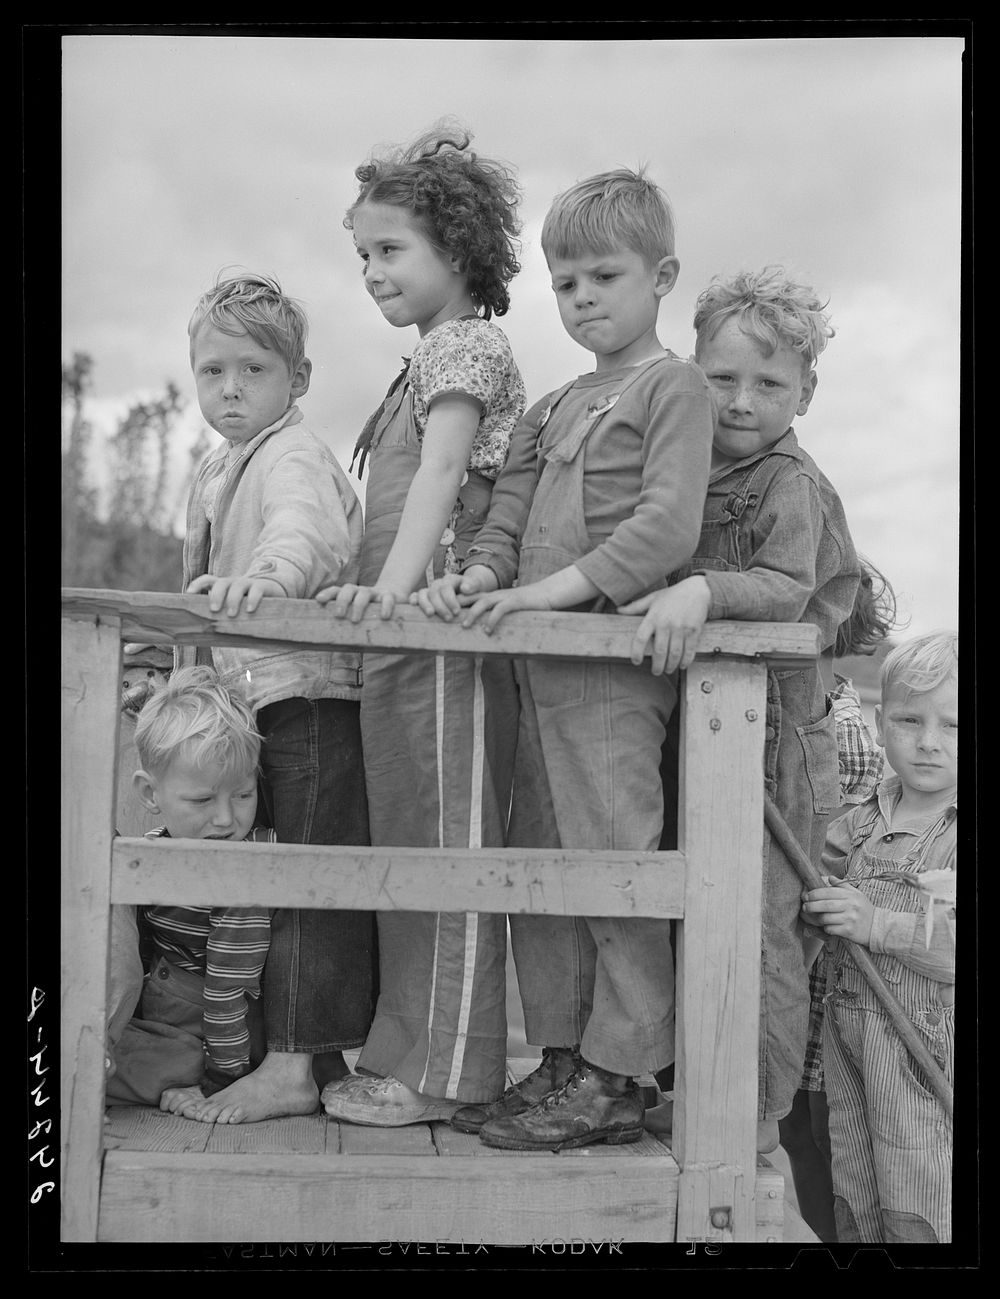 Children waiting their turn on slide. Shafter migrant camp. Shafter, California. Sourced from the Library of Congress.